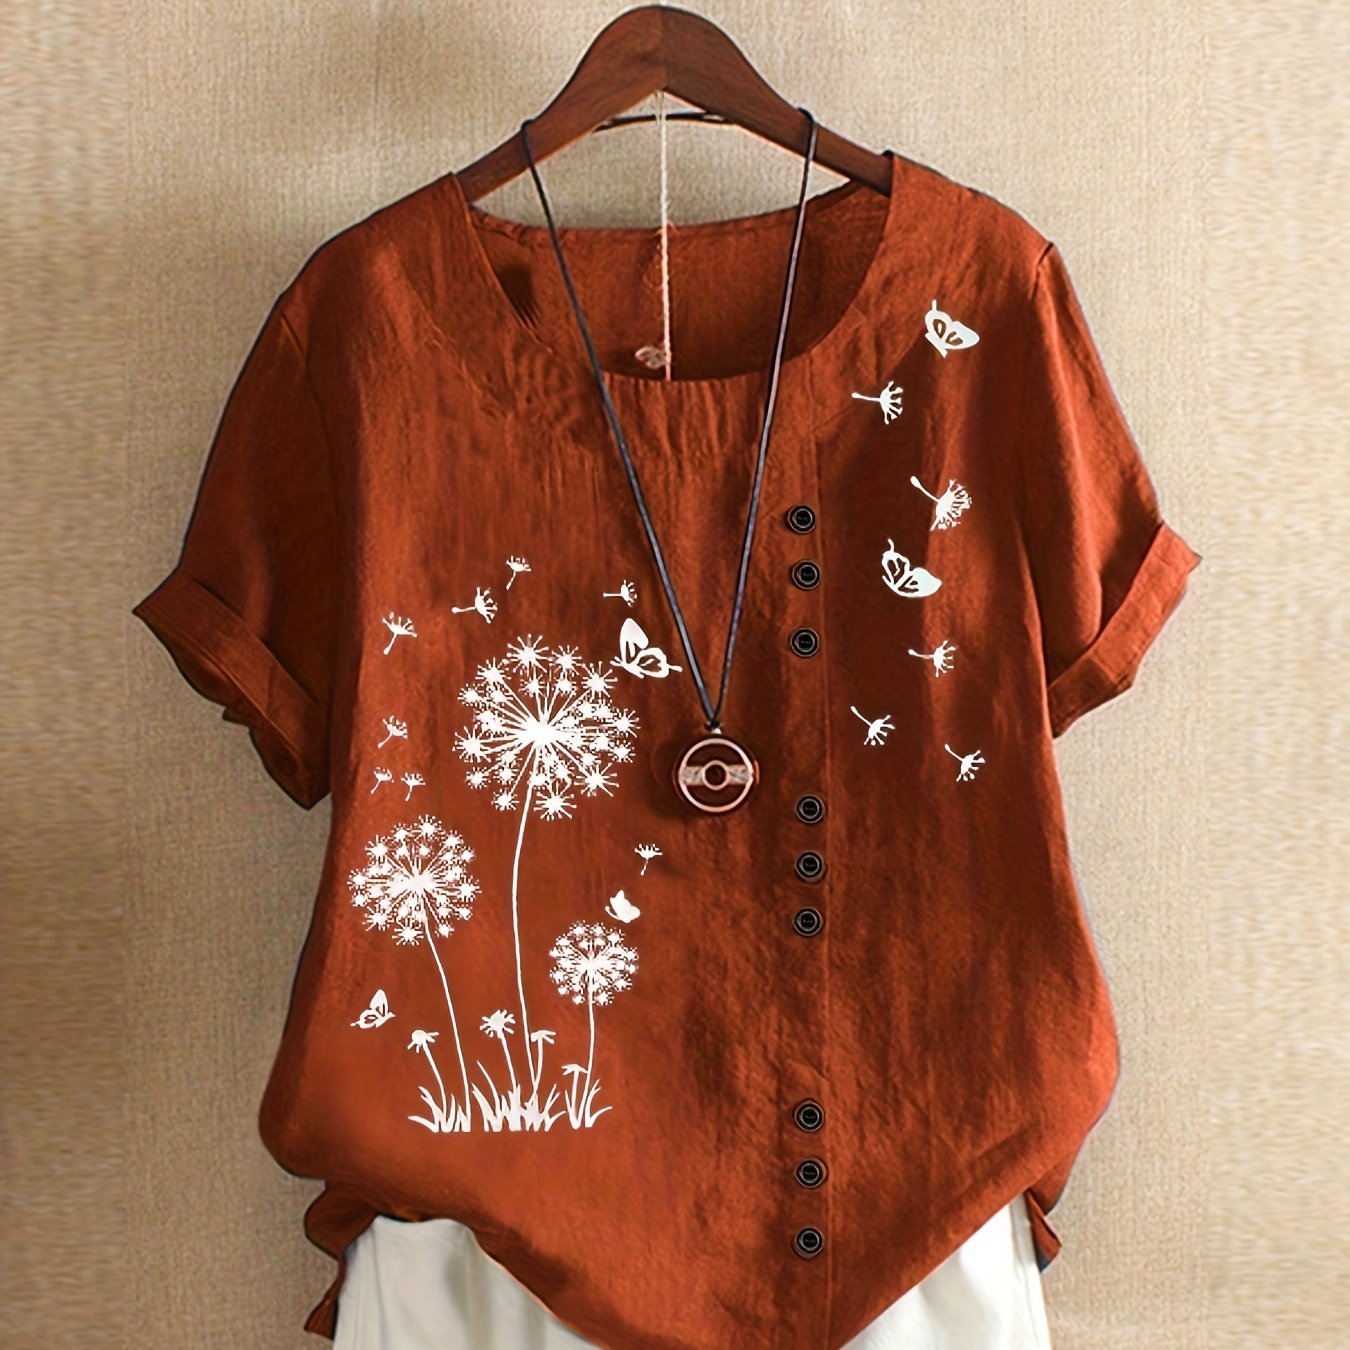 「binfenxie」Dandelion Print Blouse, Casual Crew Neck Short Sleeve Blouse For Spring & Summer, Women's Clothing